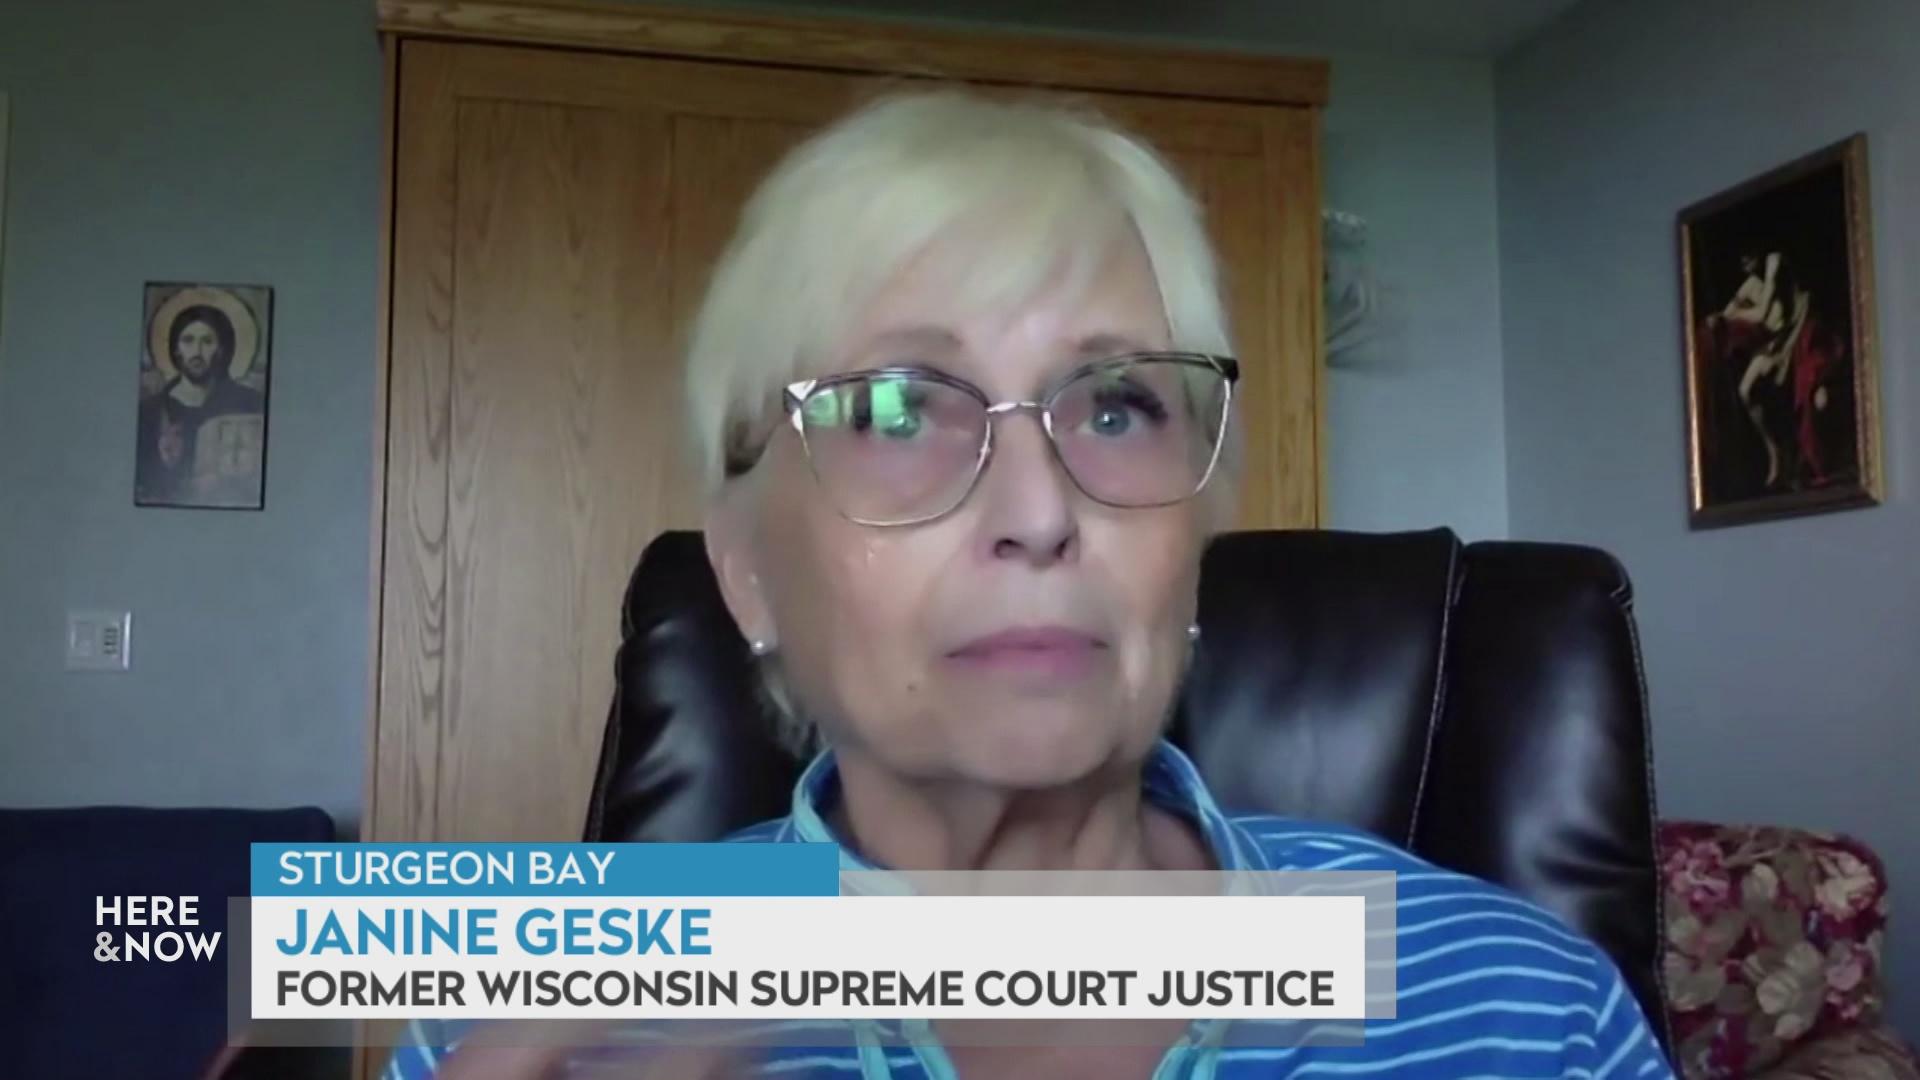 A still image from a video shows Janine Geske seated in front of a wooden door and blue wall with framed art with a graphic at bottom reading 'Sturgeon Bay,' 'Janine Geske' and 'Former Wisconsin Supreme Court Justice.'